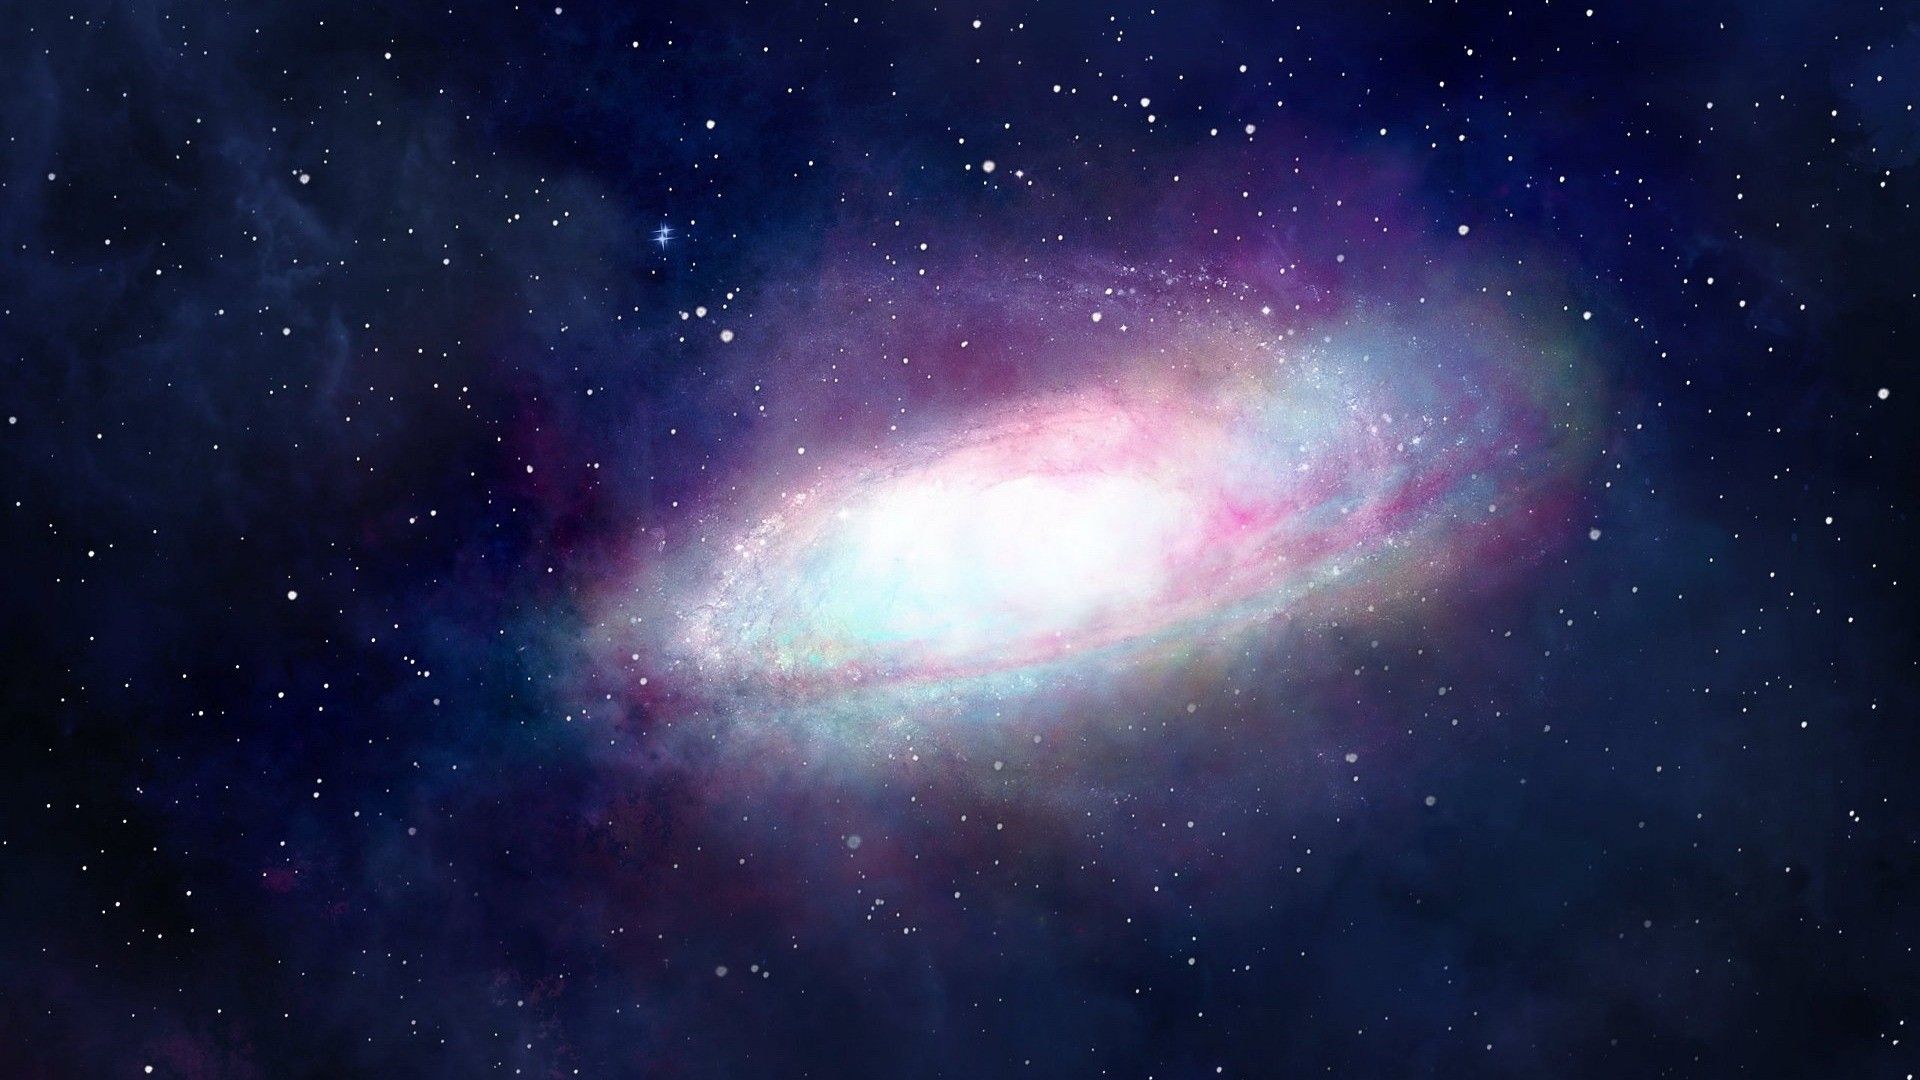 A galaxy in space with stars and nebulae - 1920x1080, galaxy